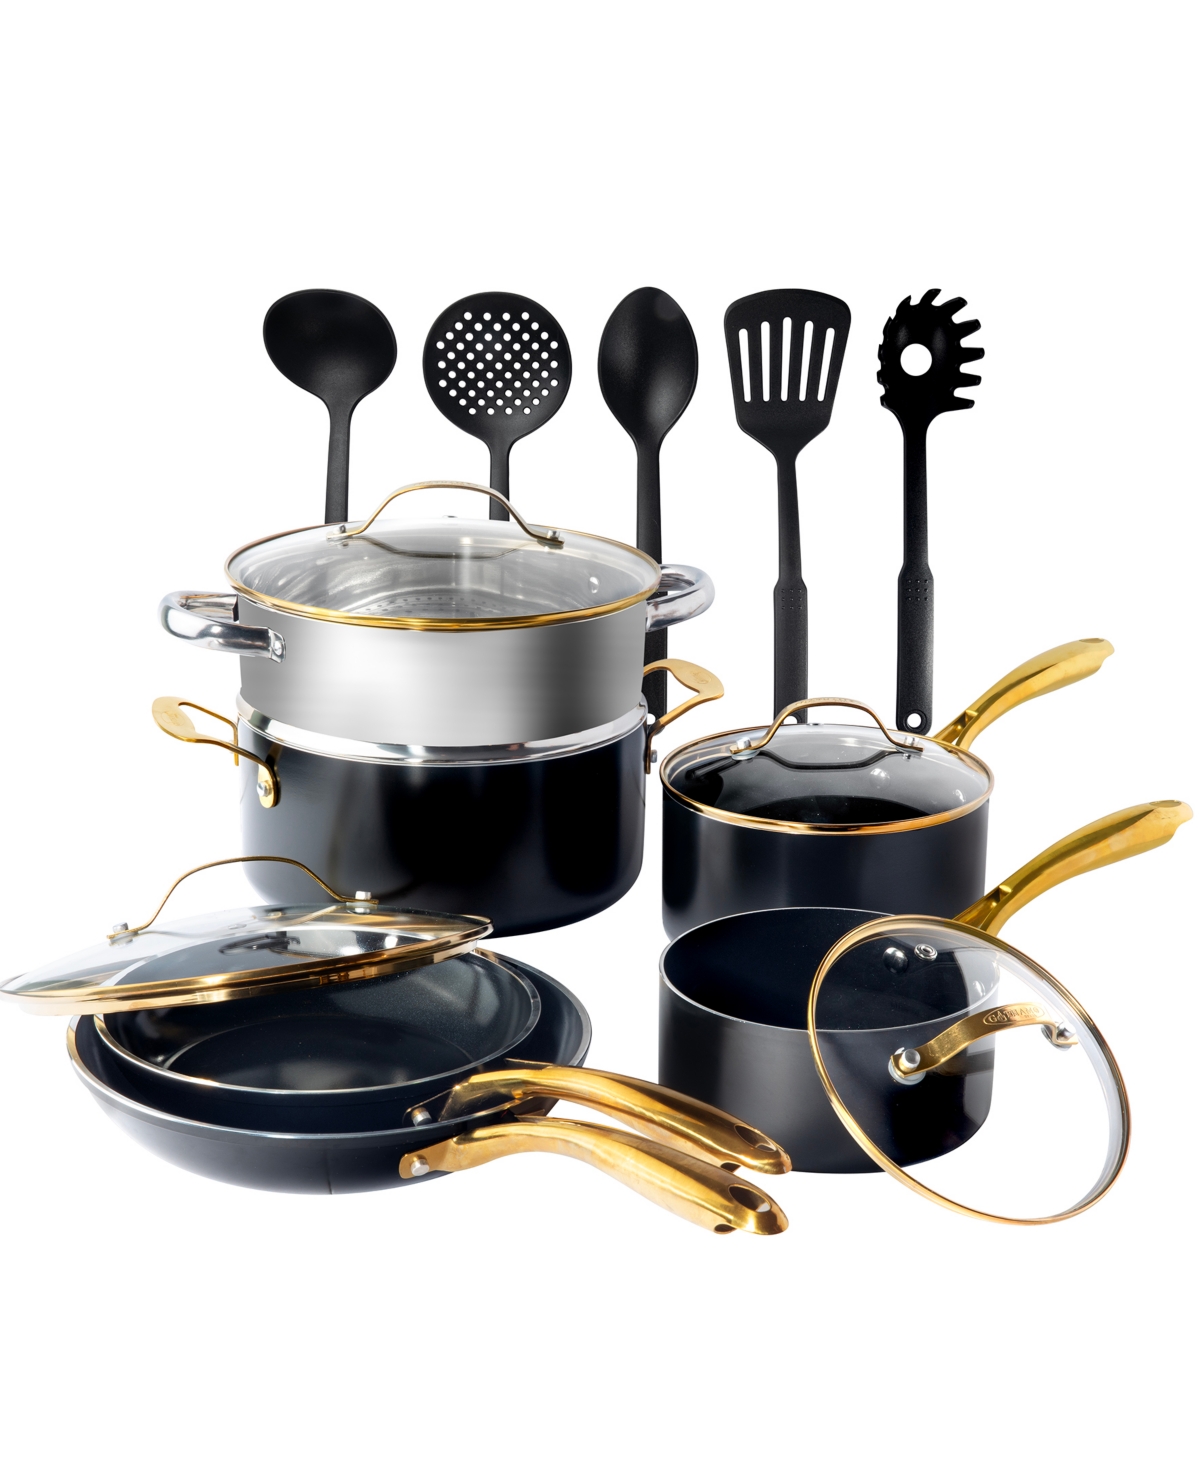 Gotham Steel Natural Collection Ceramic Coating Non-stick 15-piece Cookware Set With Gold-tone Handles In Black